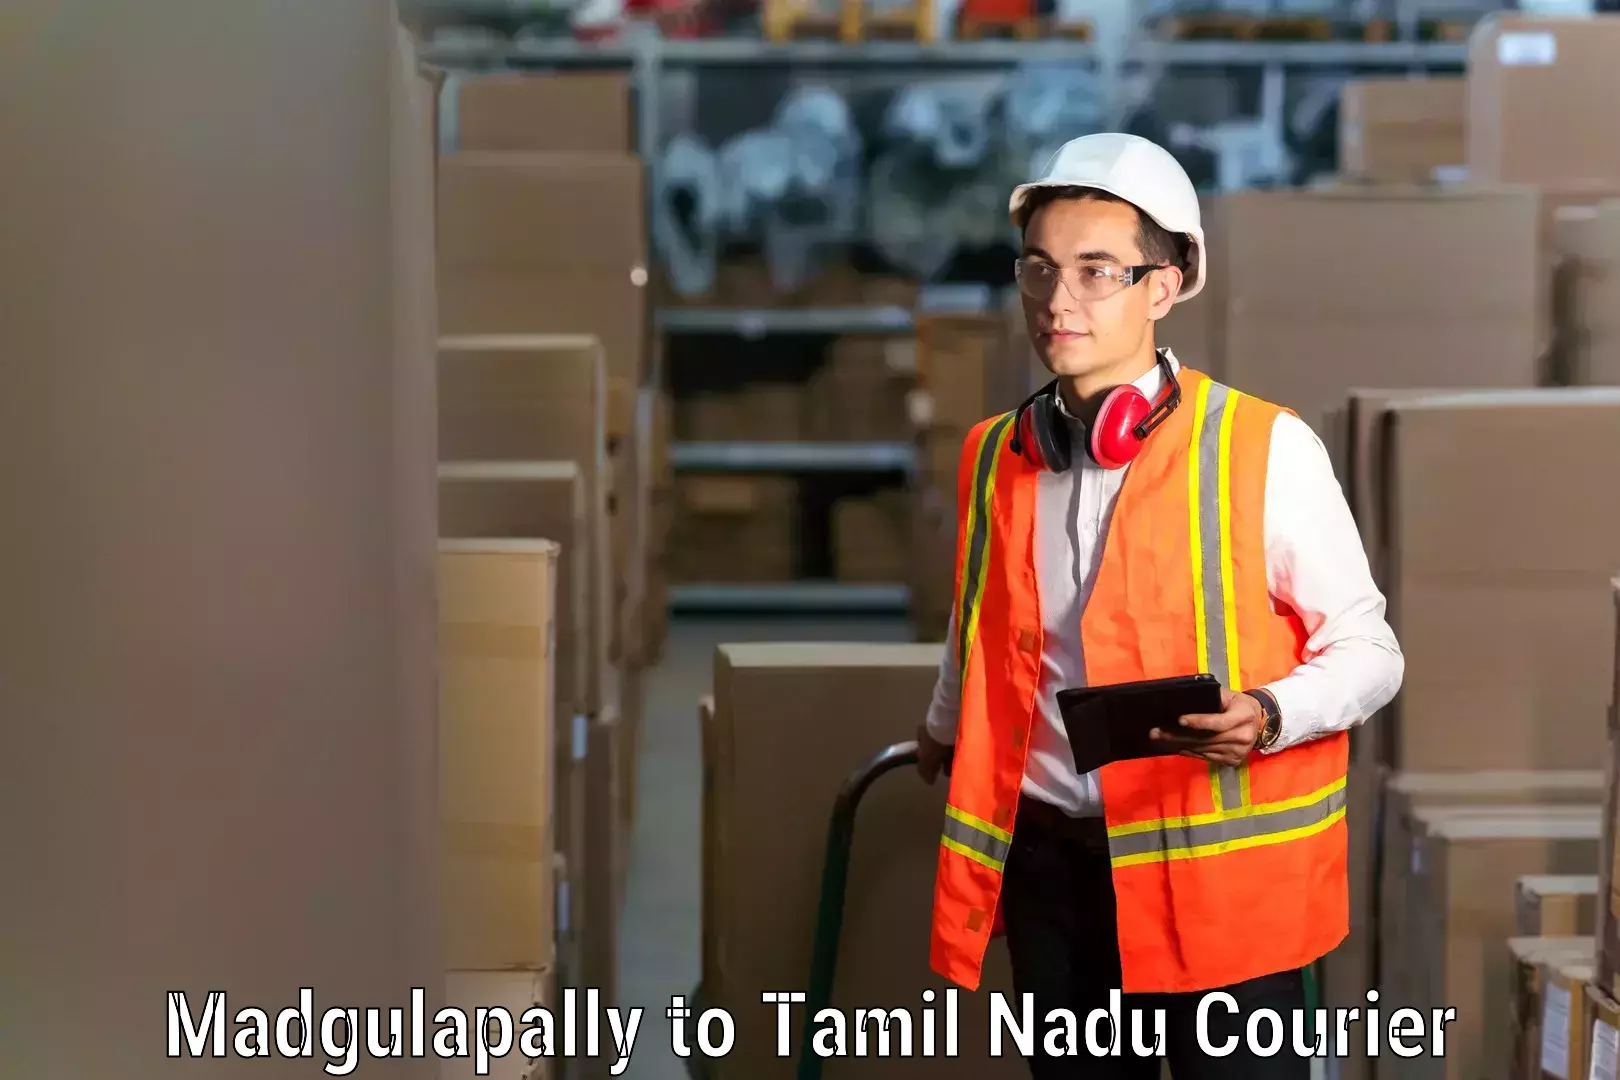 Furniture moving experts Madgulapally to Coimbatore